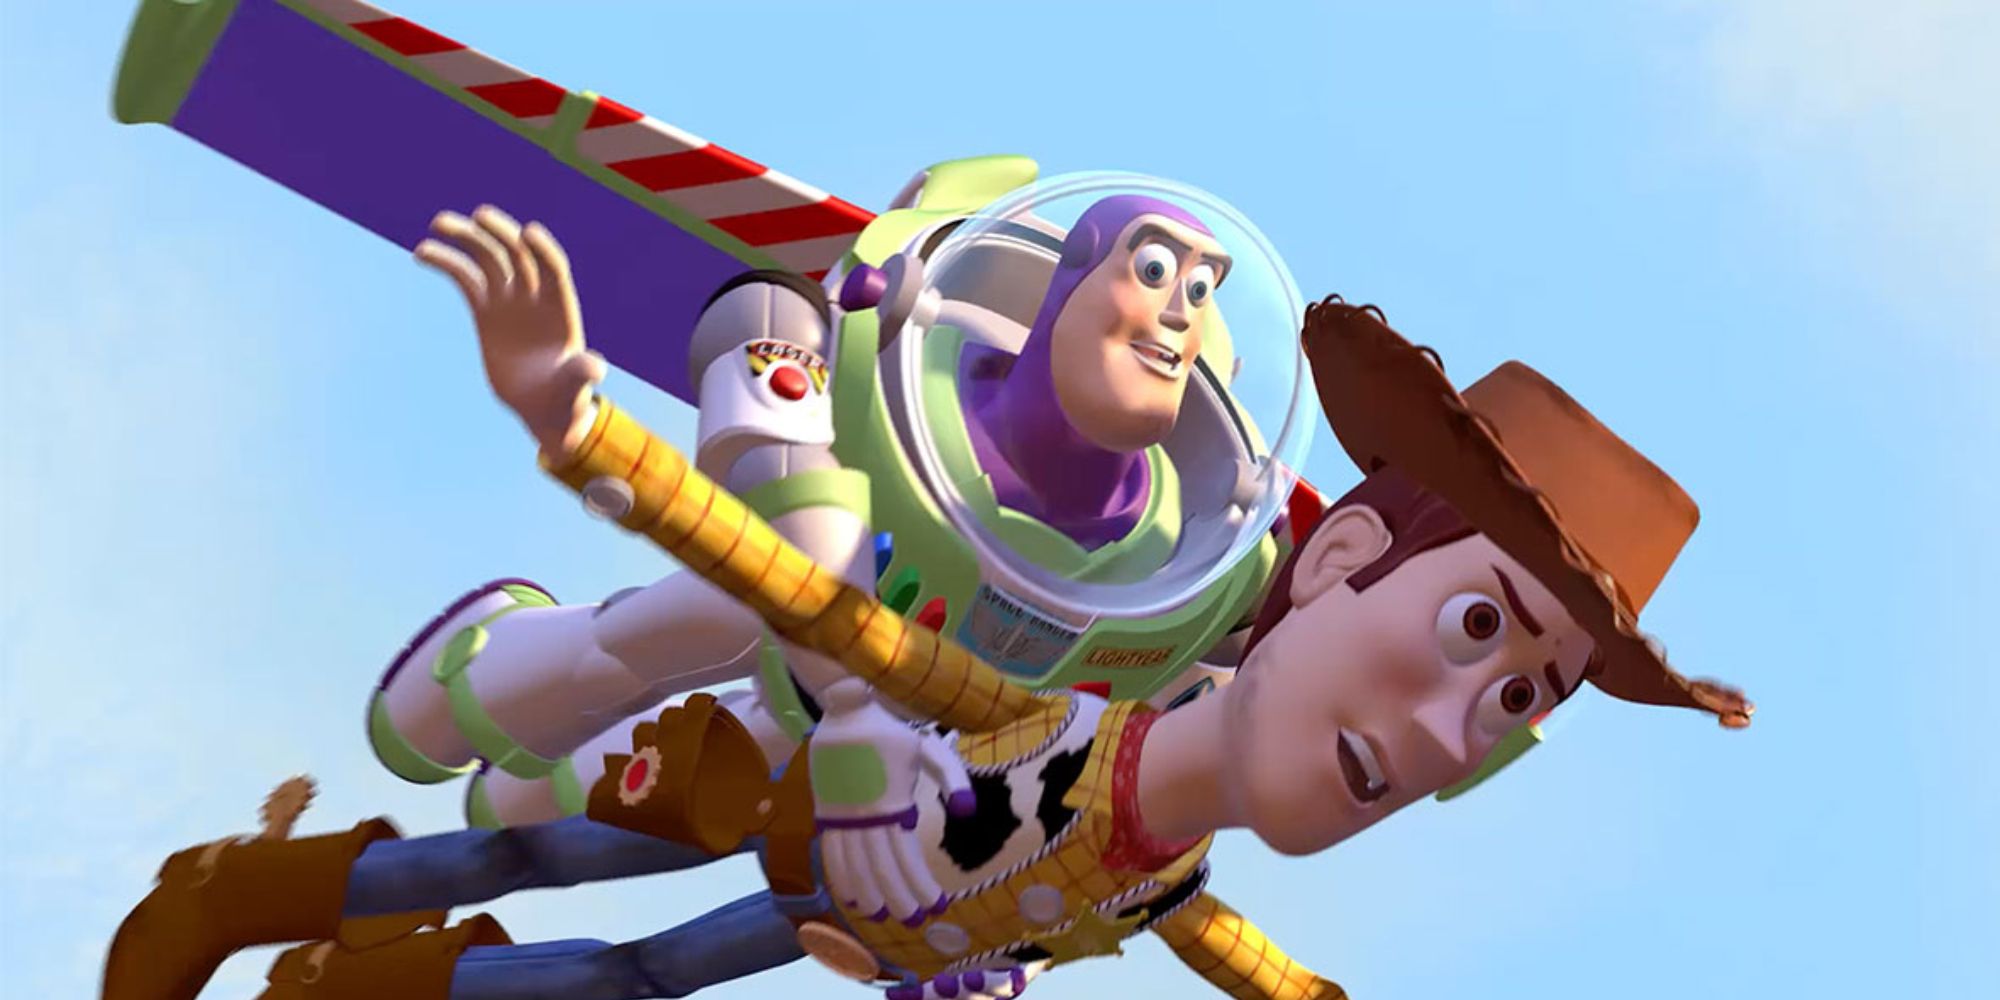 Buzz Lightyear voiced by Tim Allen carrying Woody voiced by Tom Hanks soaring through the sky from Toy Story